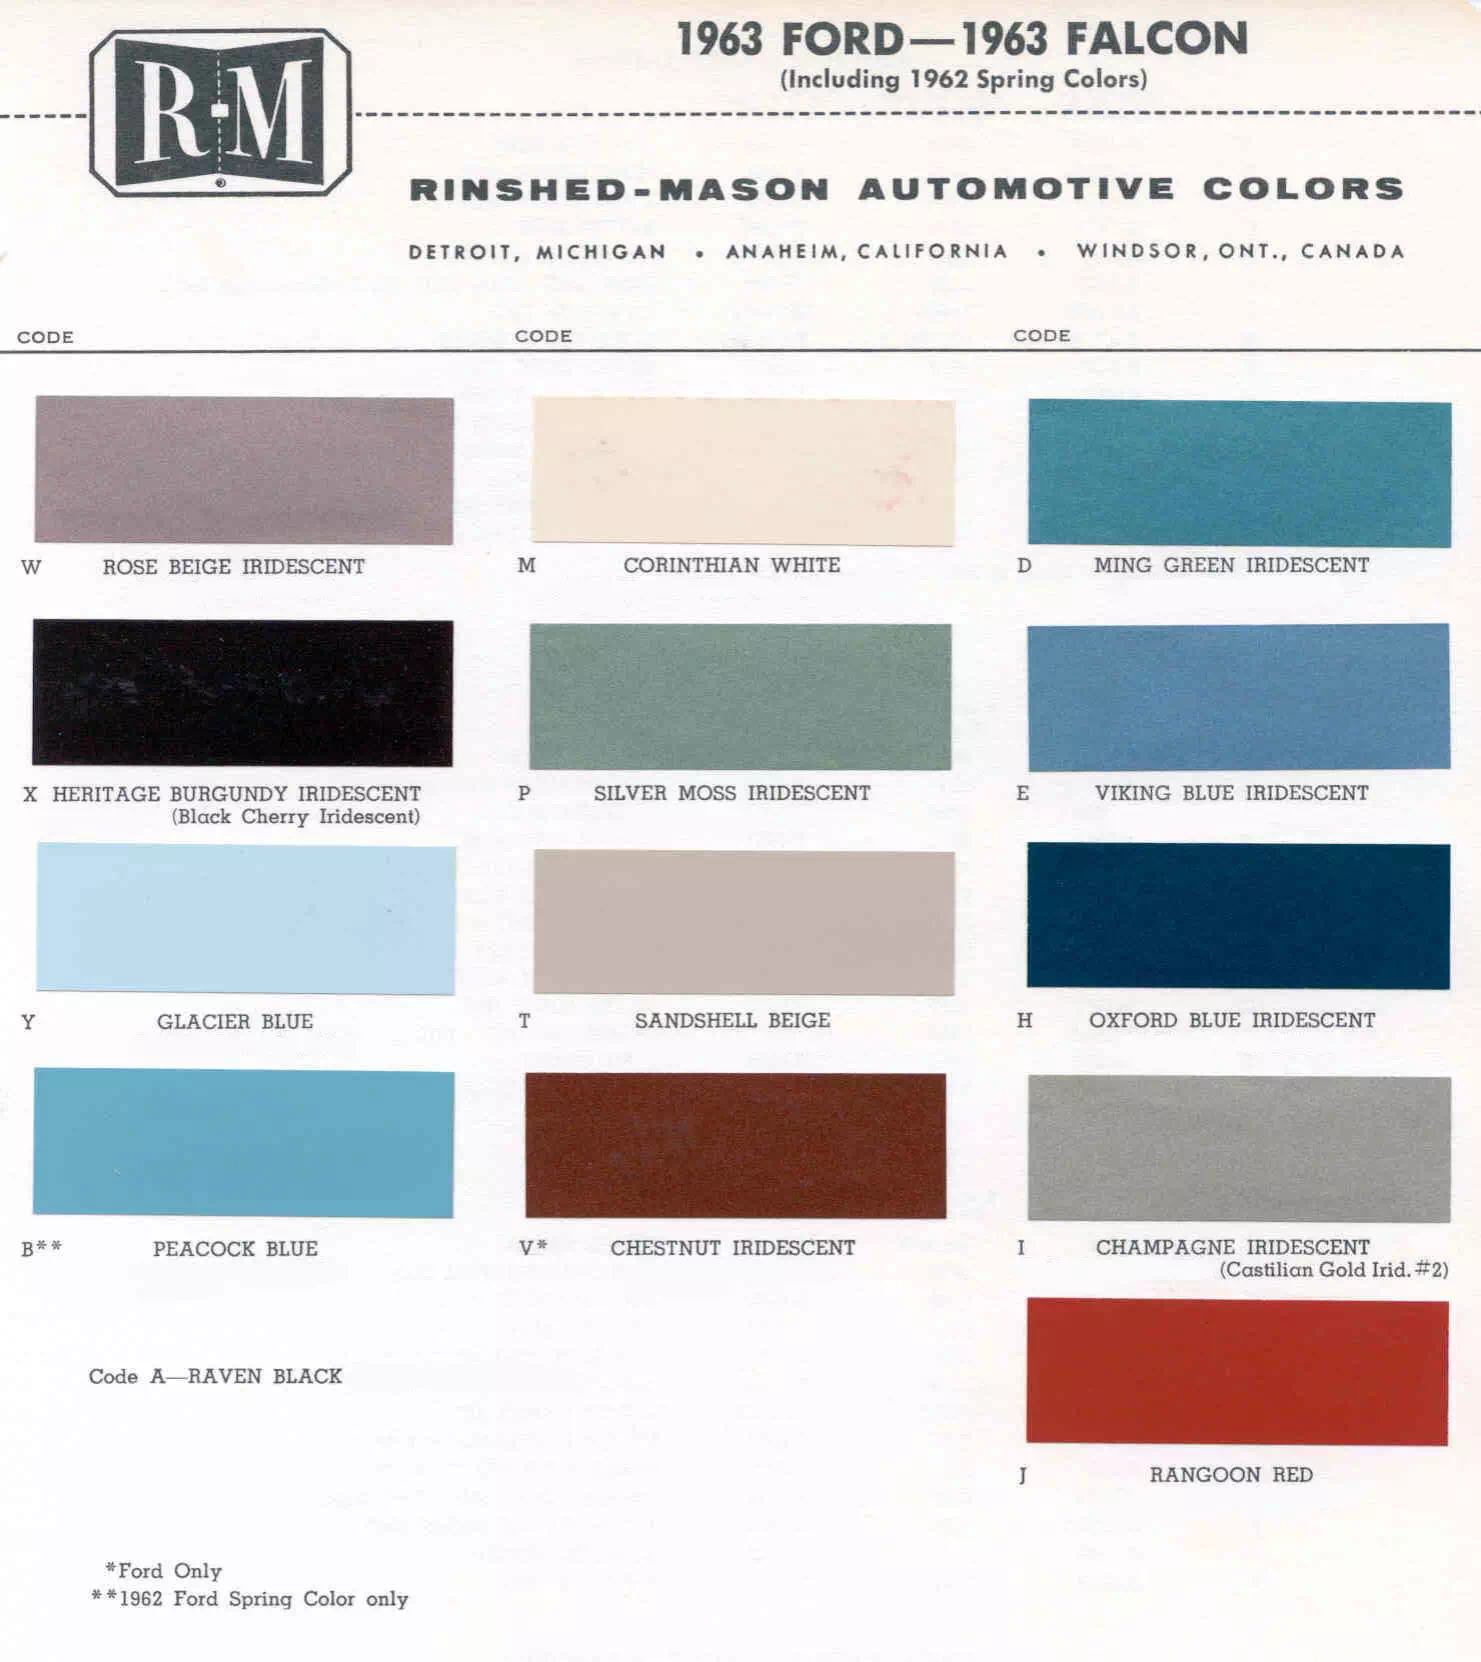 Color examples, Ordering Codes, OEM Paint Code, Color Swatches, and Color Names for the Ford Motor Company in 1963